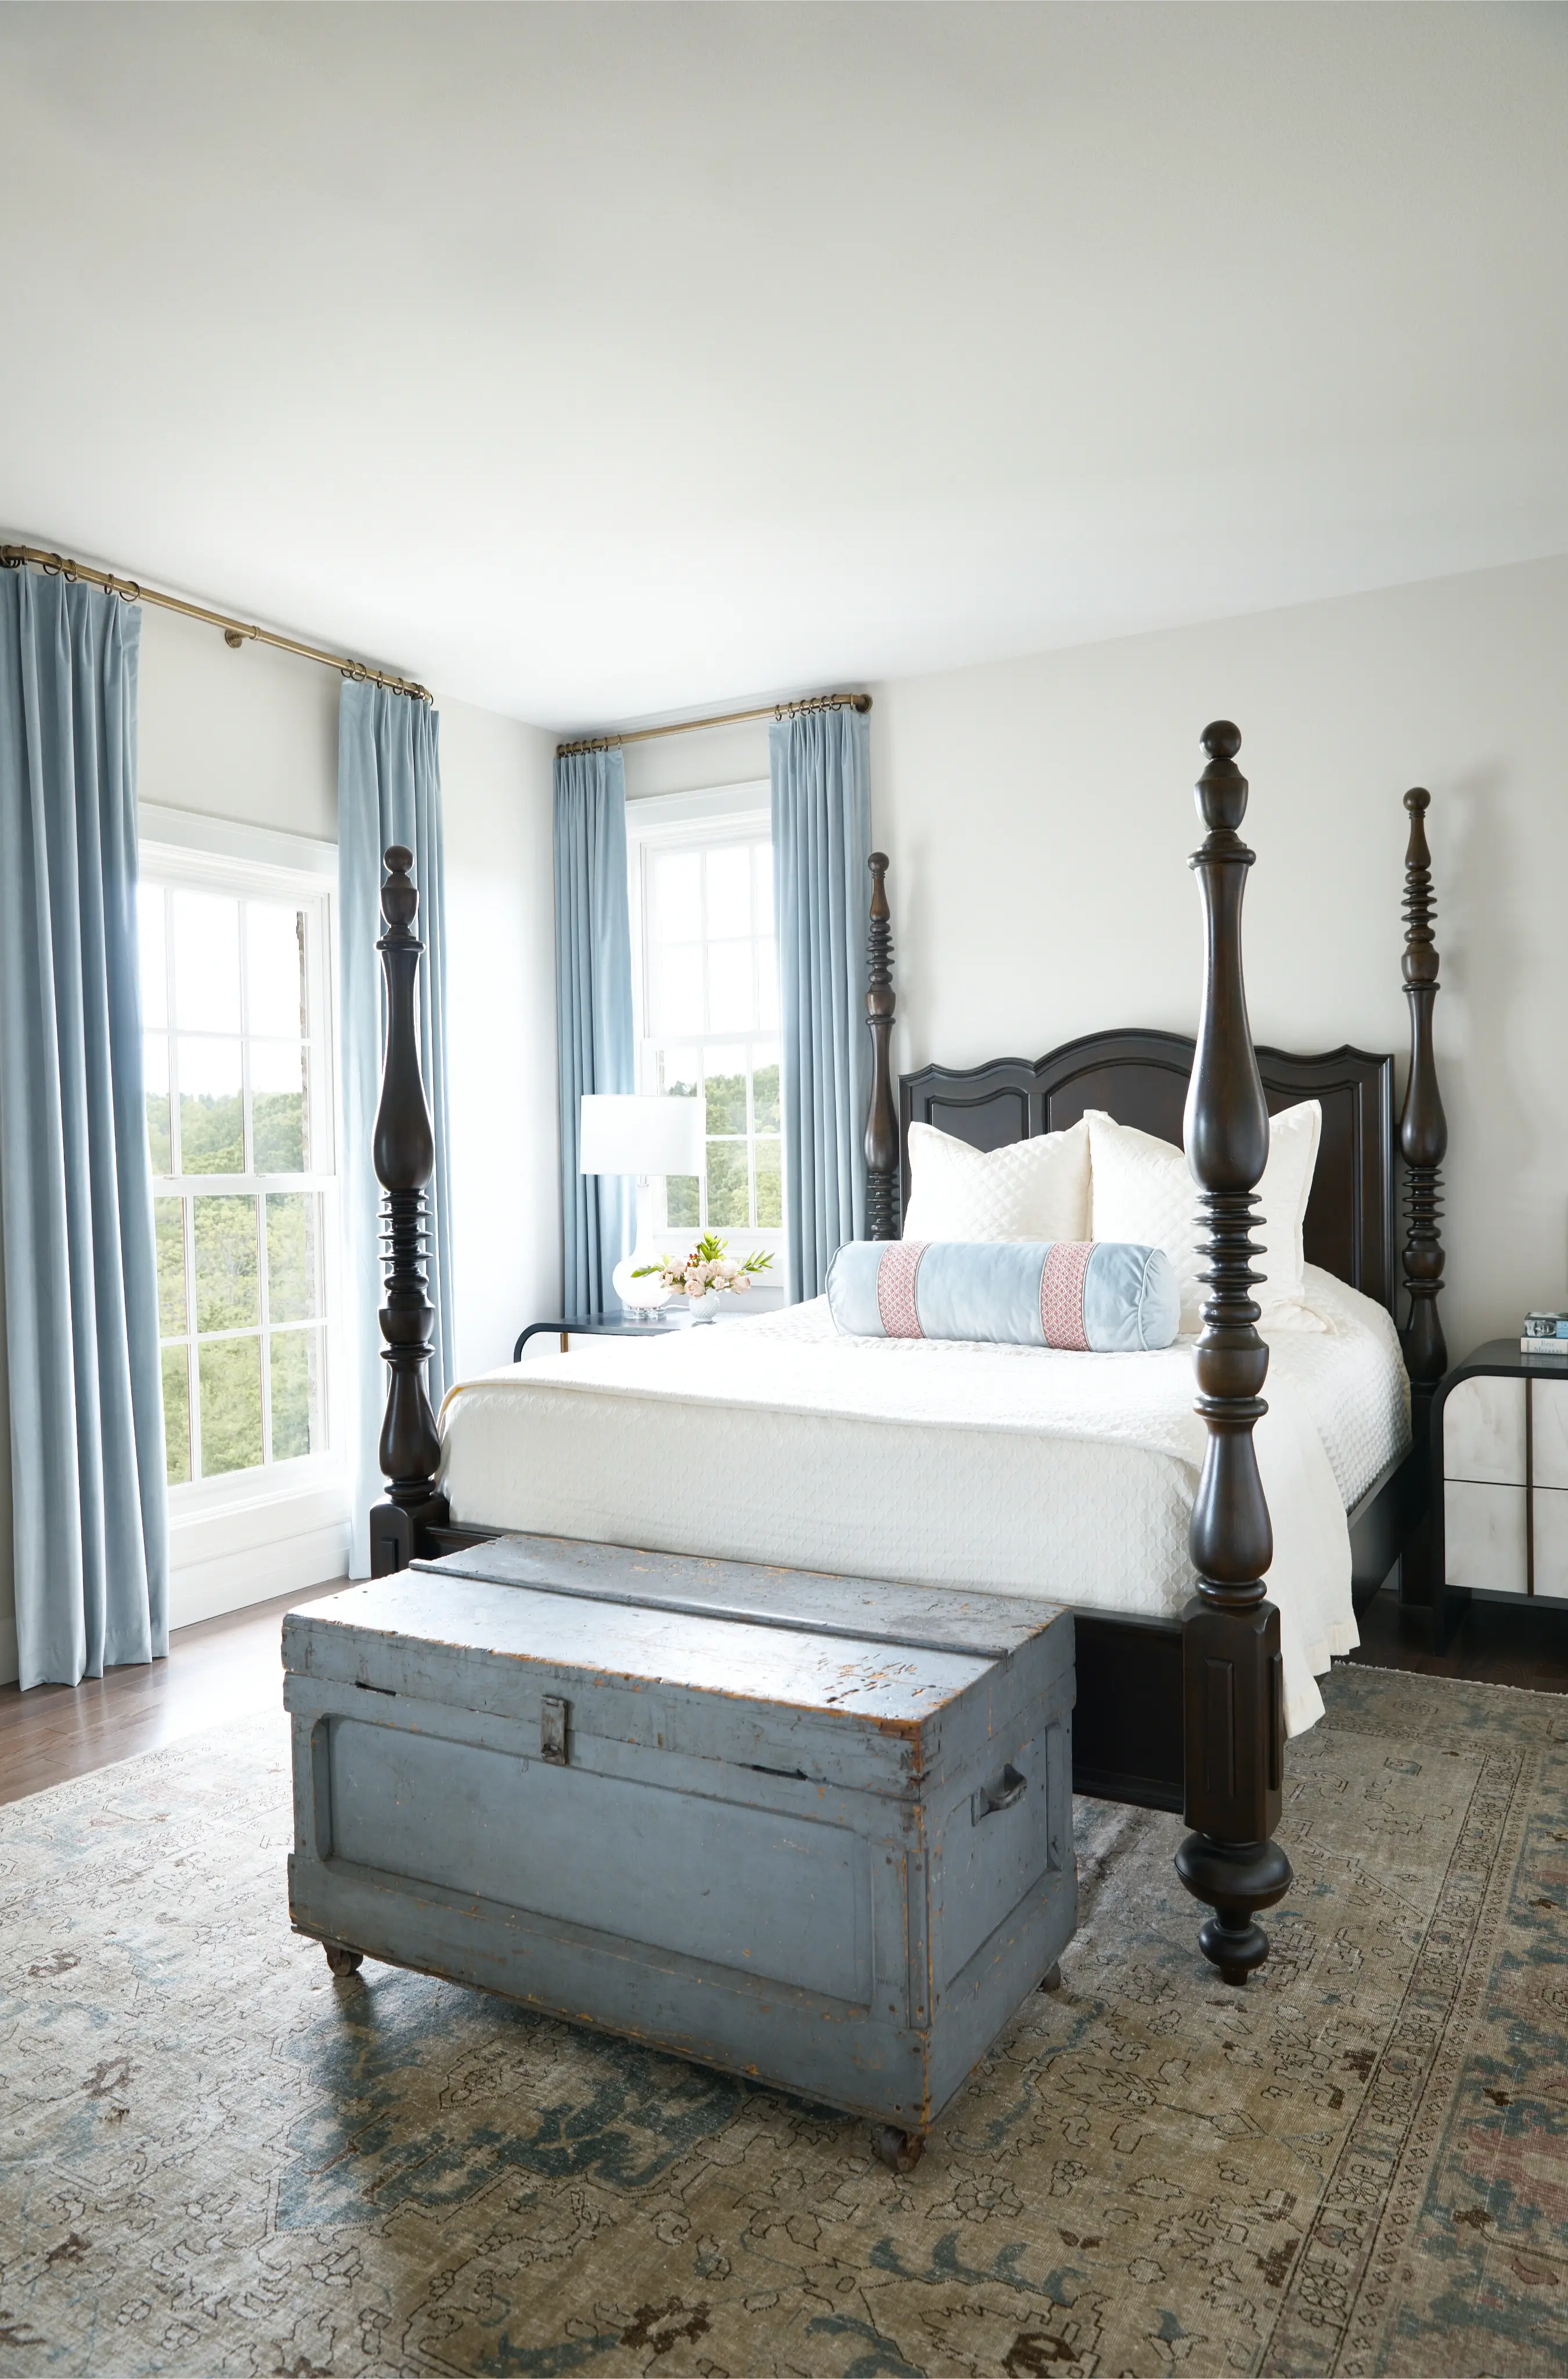 5 - Southern Living _ Bedroom 1 (1)